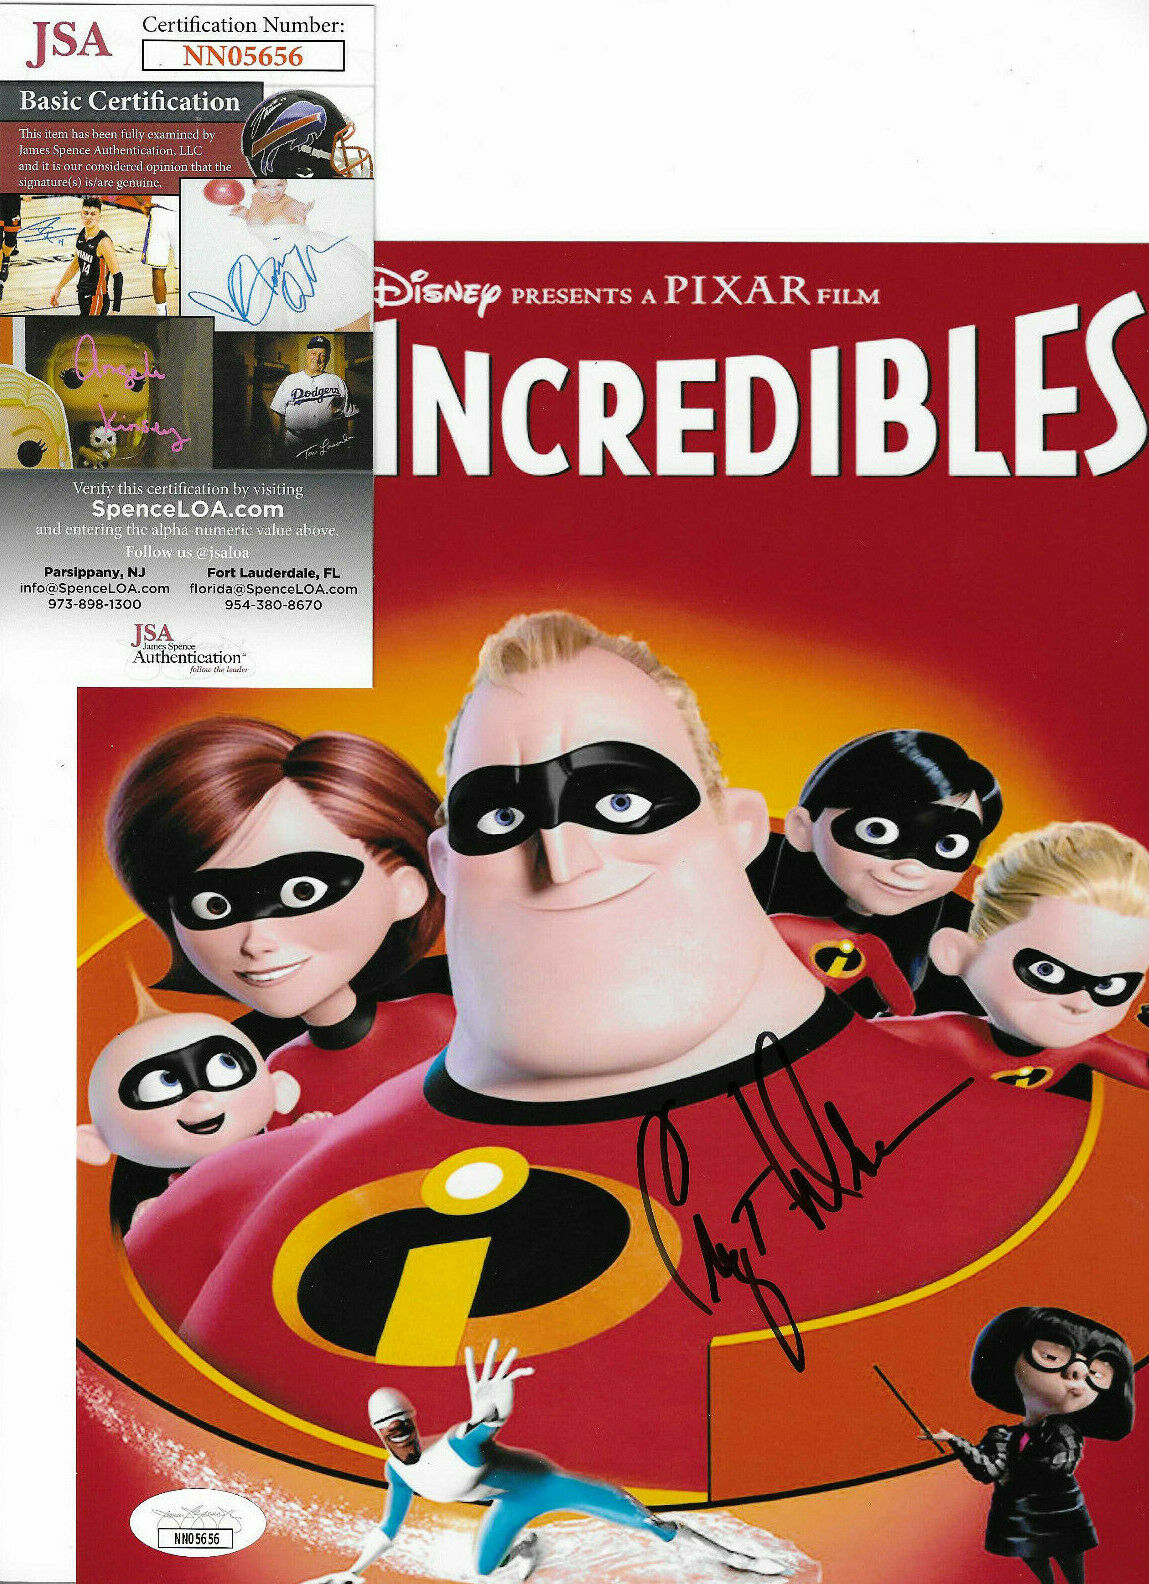 Craig T. Nelson Authentic Signed 8x10 Photo Poster painting Autograph, The Incredibles, JSA COA